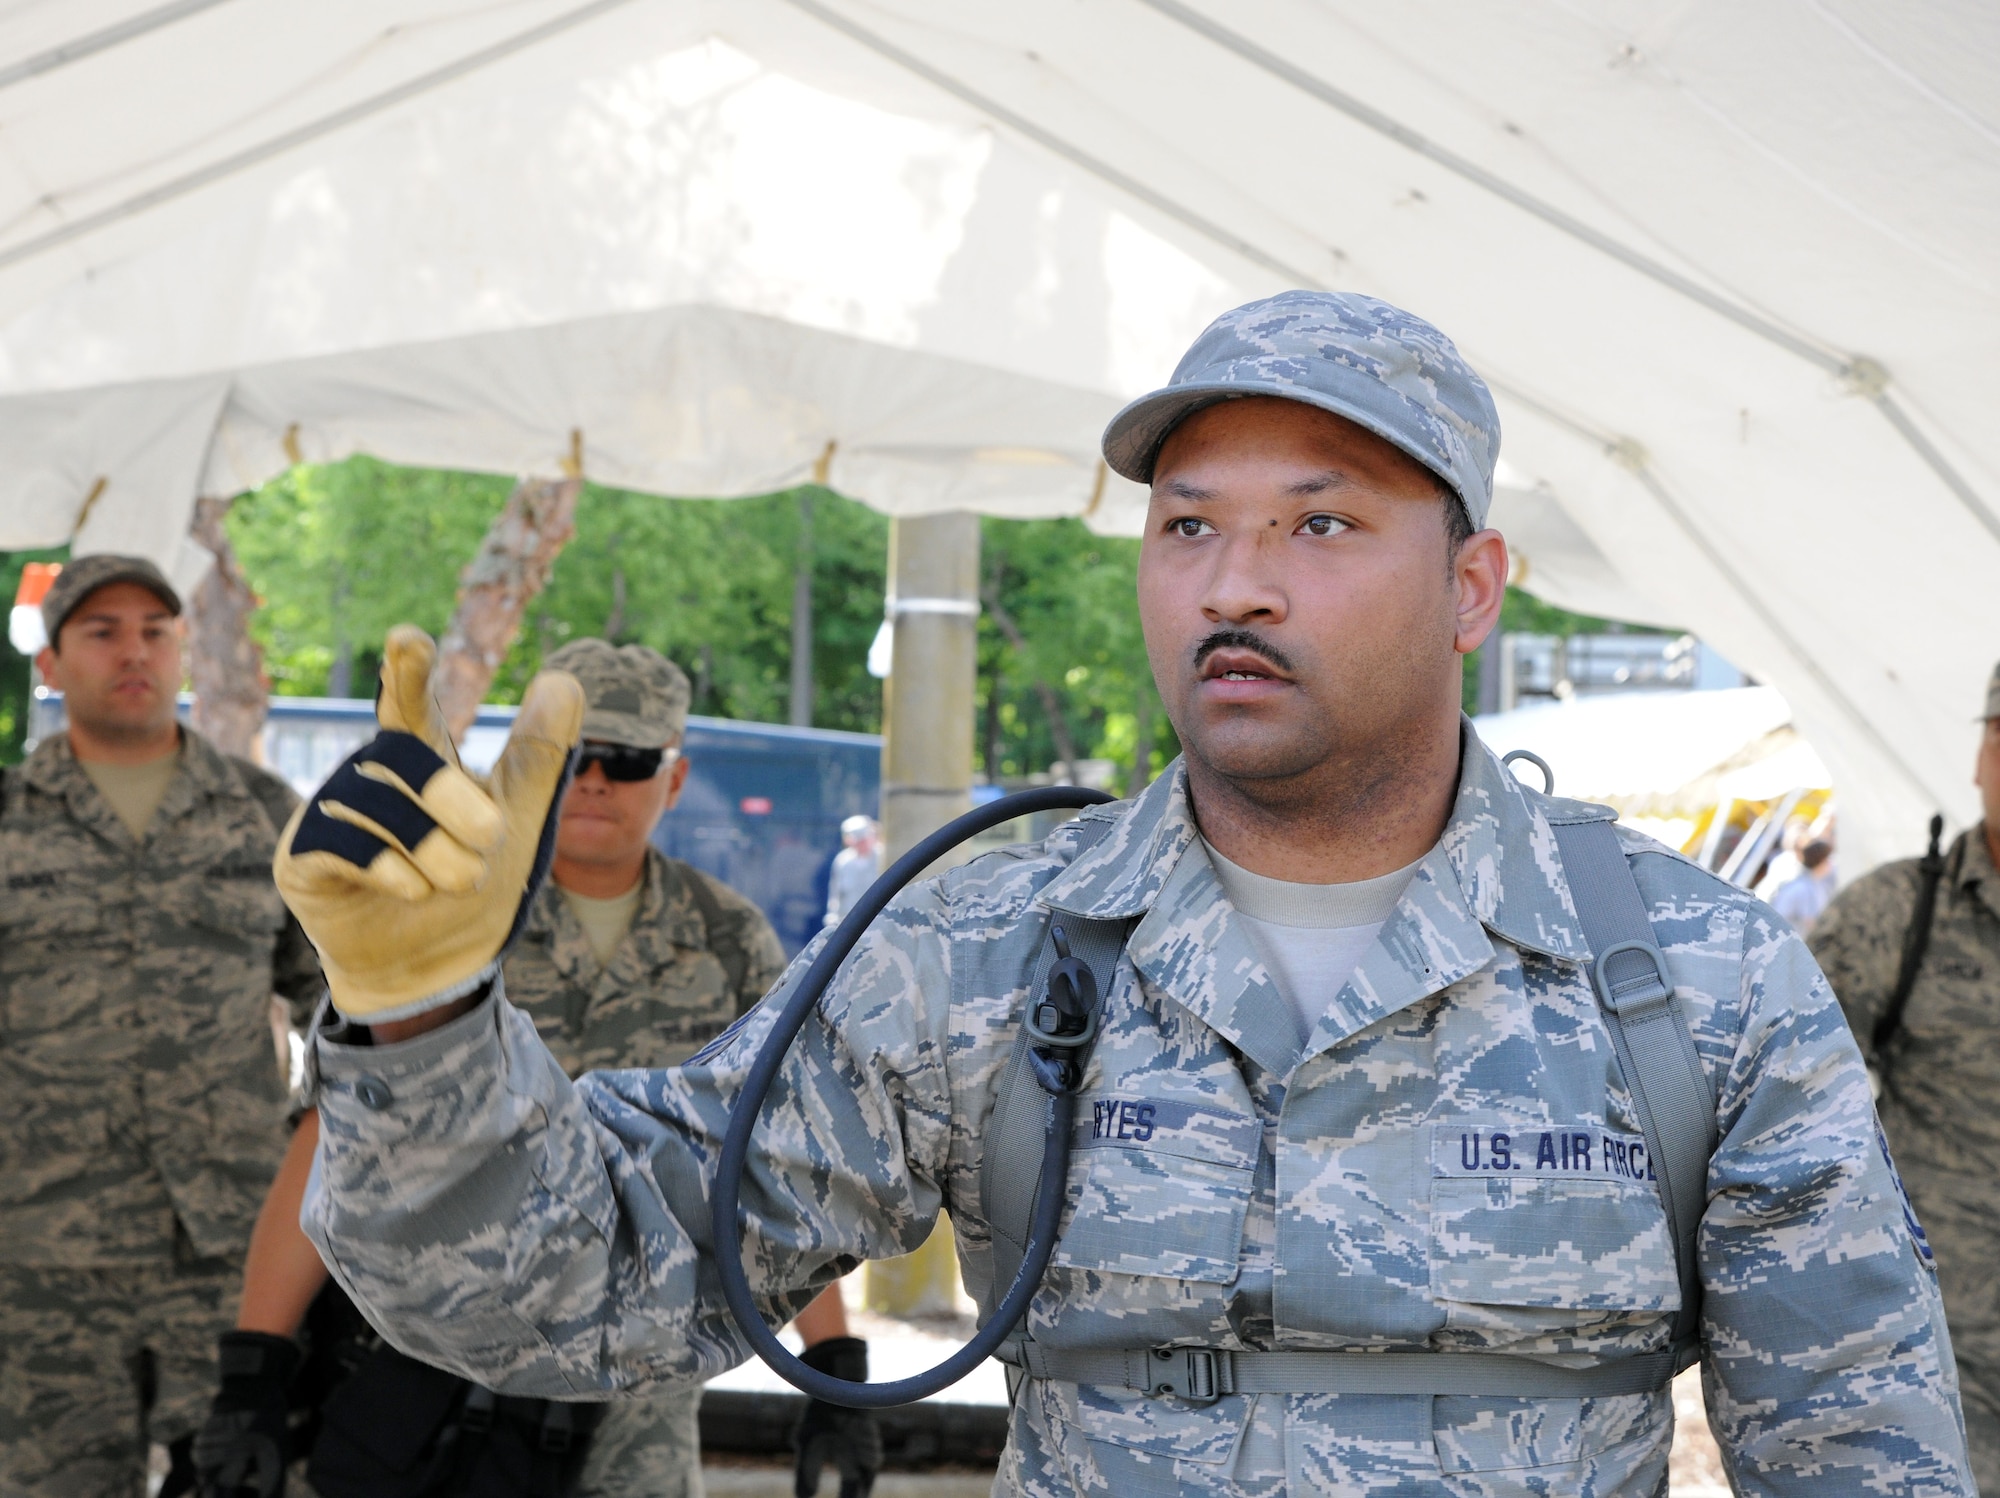 Tech. Sgt. Chito Reyes, 113th services flight, D.C. Air National Guard, briefs Bravo Team members during  Chemical Biological Radiological Nuclear (CBRN) Emergency Response Force Package training, May 14, 2015 in Virginia Beach, Va.  (U.S. Air National Guard photo by Airman 1st Class Anthony Small)